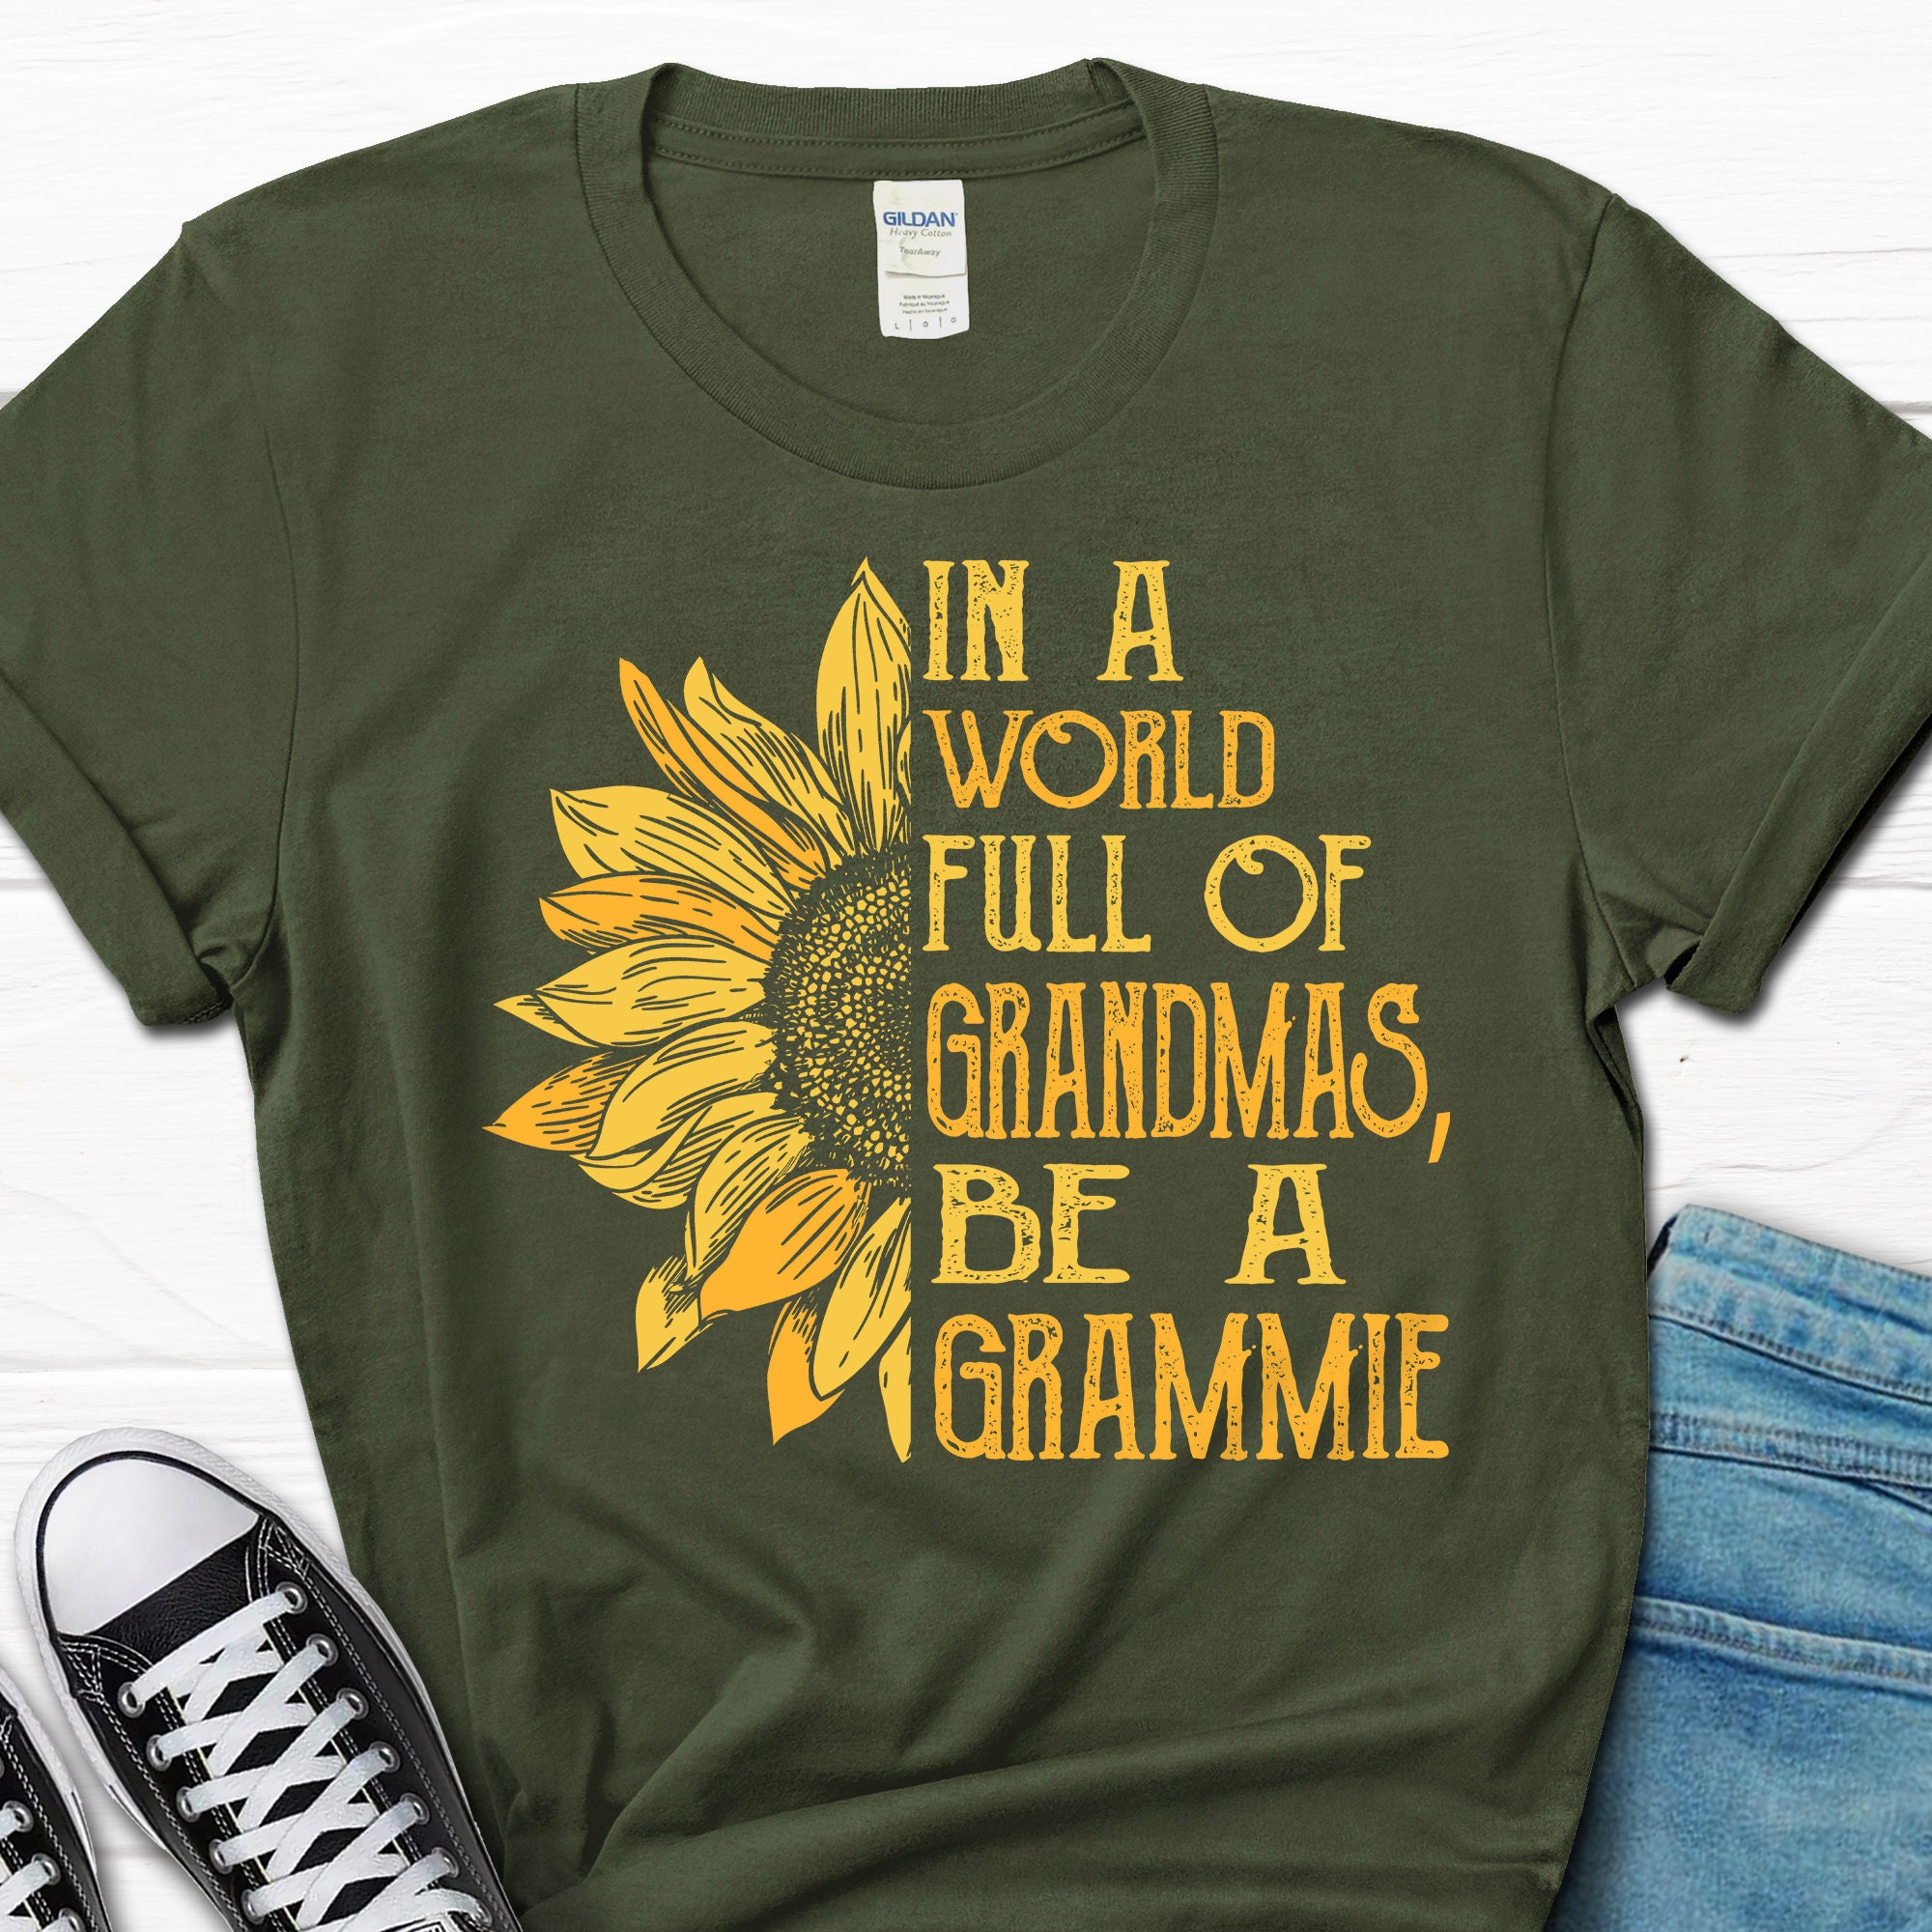 Grammie Gift Shirt in a World Full of Sunflowers Be a Grammie - Etsy